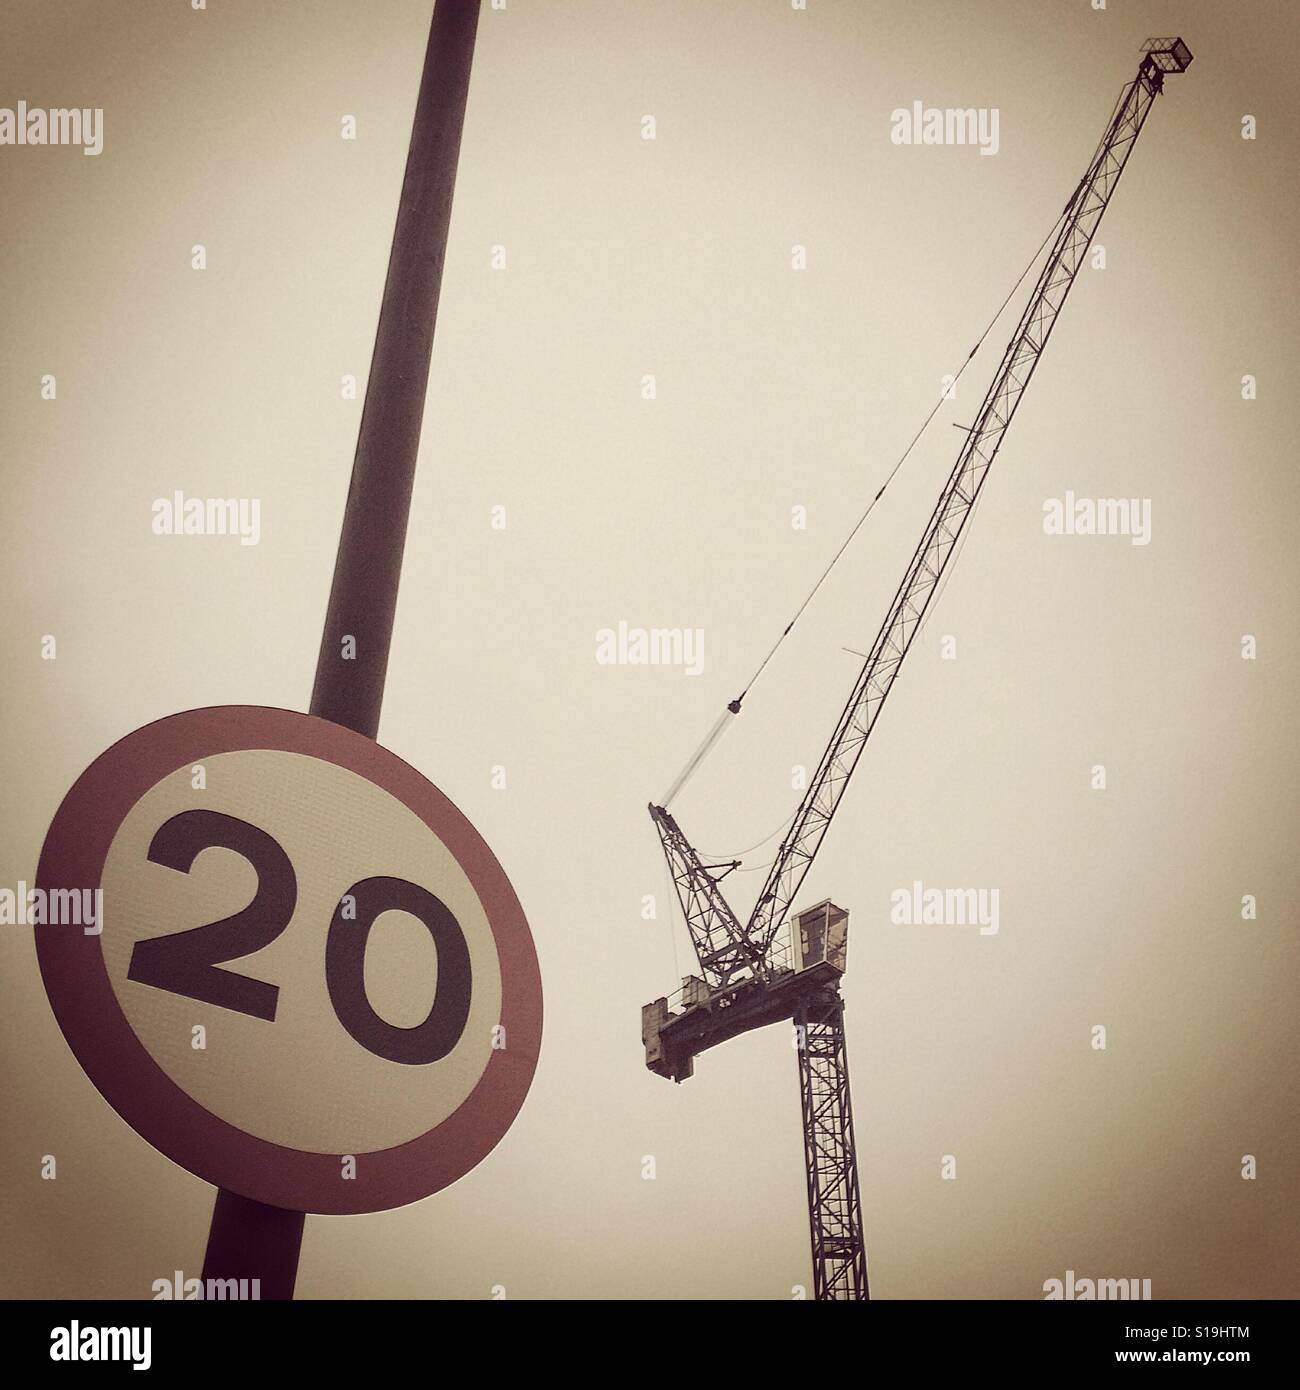 Crane with a speed restriction sign Stock Photo